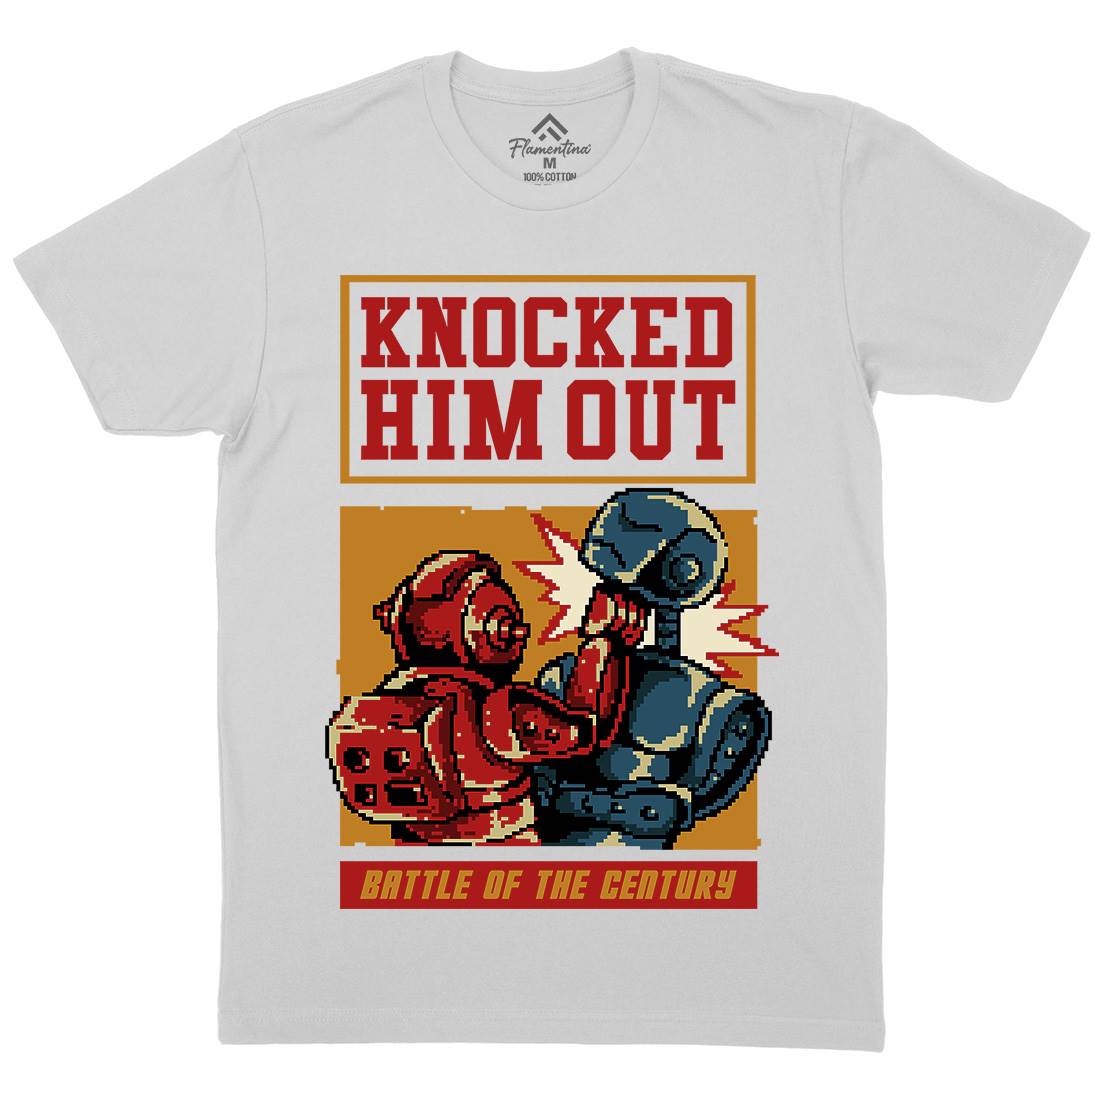 Knocked Him Out Mens Crew Neck T-Shirt Space B923